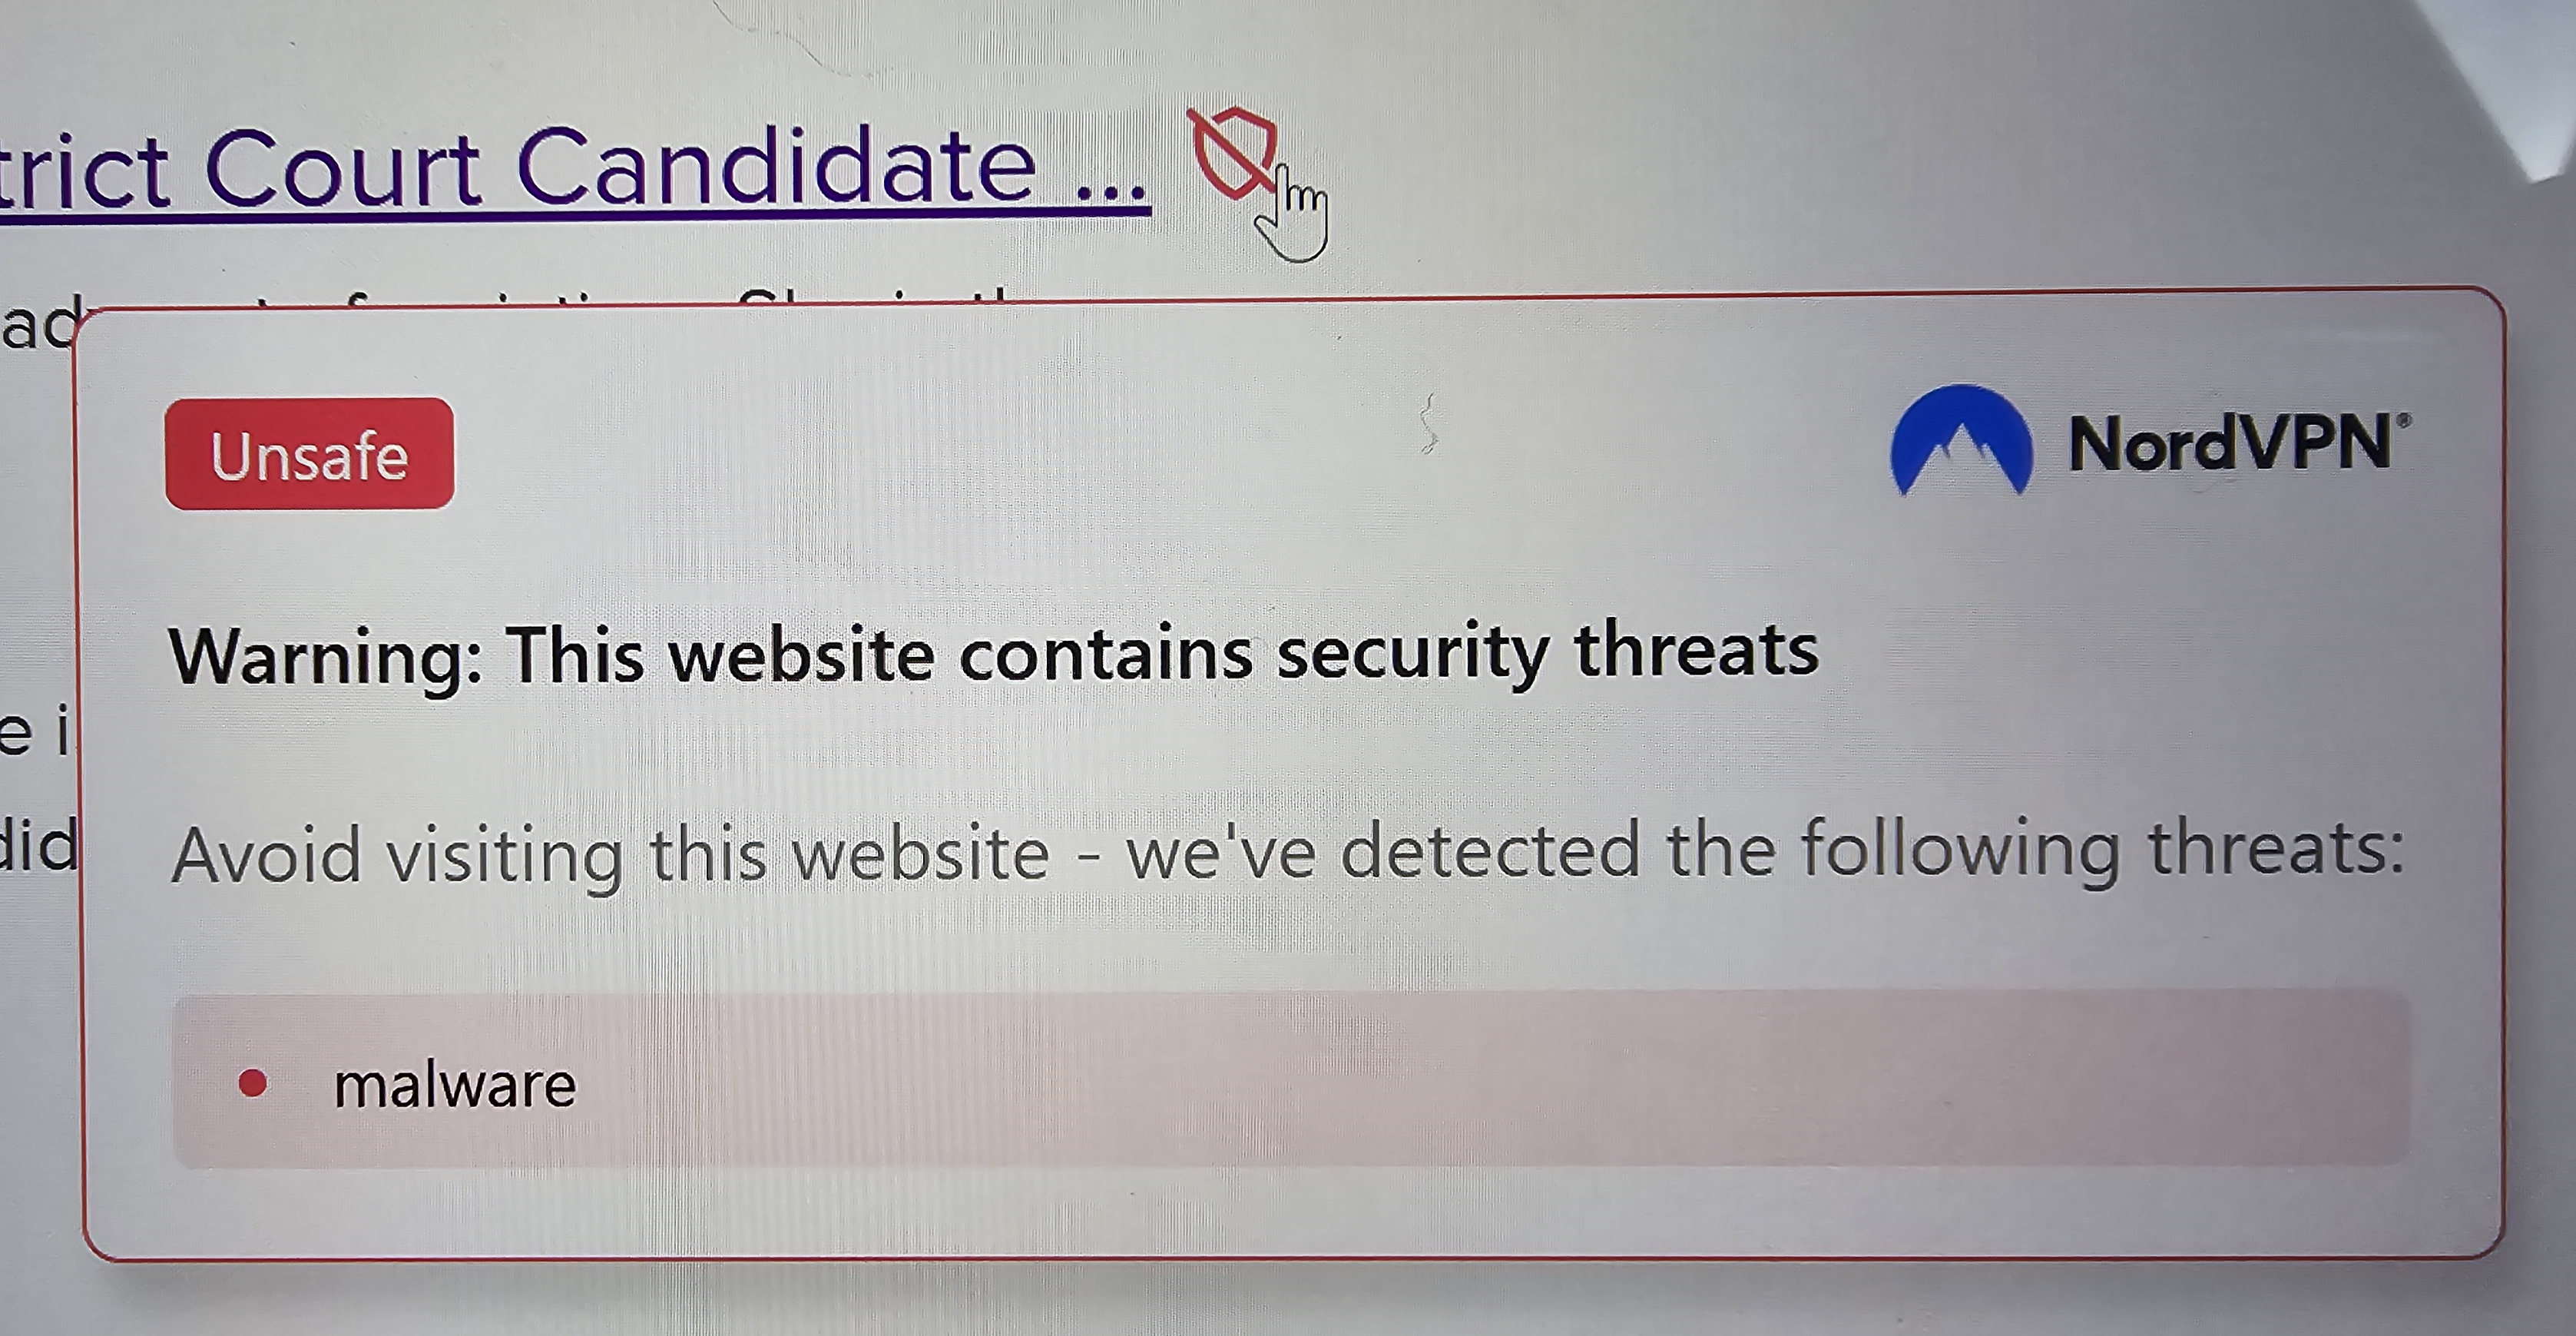 Nord VPN falsely identifies Election Website as Malware Site